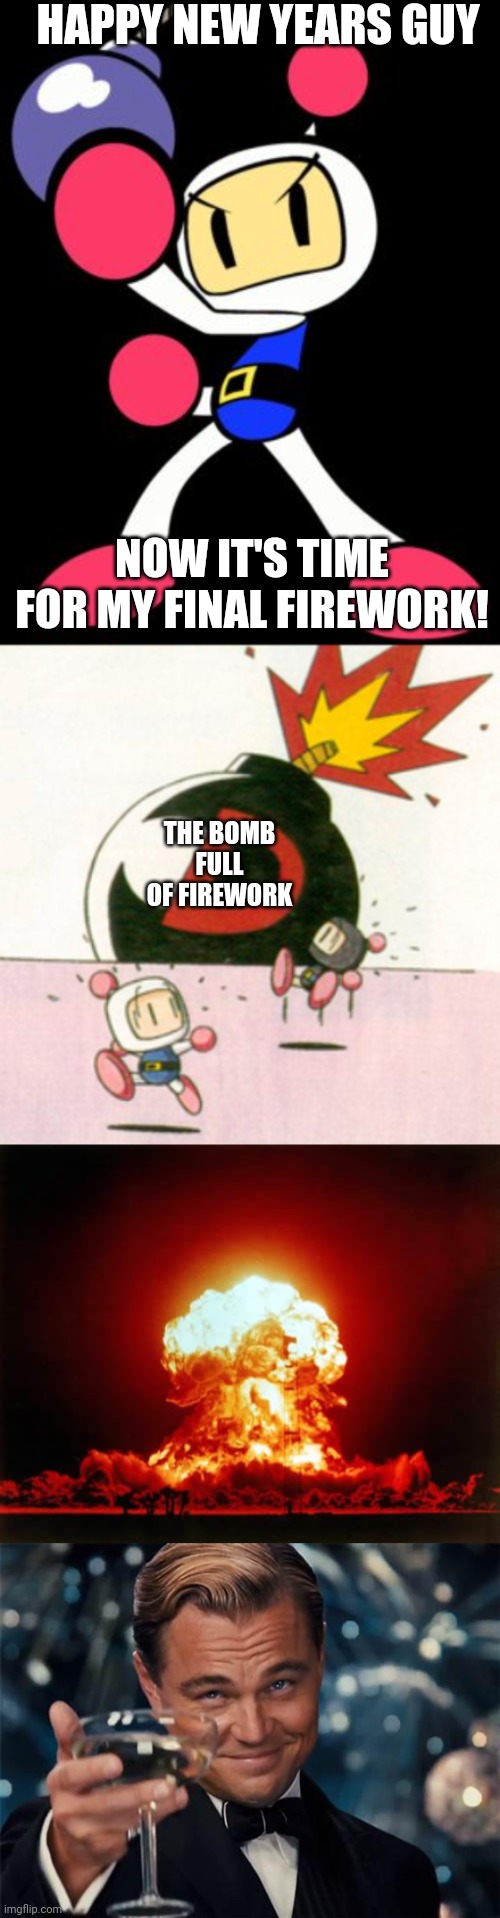 Cheers to all user | HAPPY NEW YEARS GUY; NOW IT'S TIME FOR MY FINAL FIREWORK! THE BOMB FULL OF FIREWORK | image tagged in bomberman,memes,nuclear explosion,wolf of wall street,fireworks,bomb | made w/ Imgflip meme maker